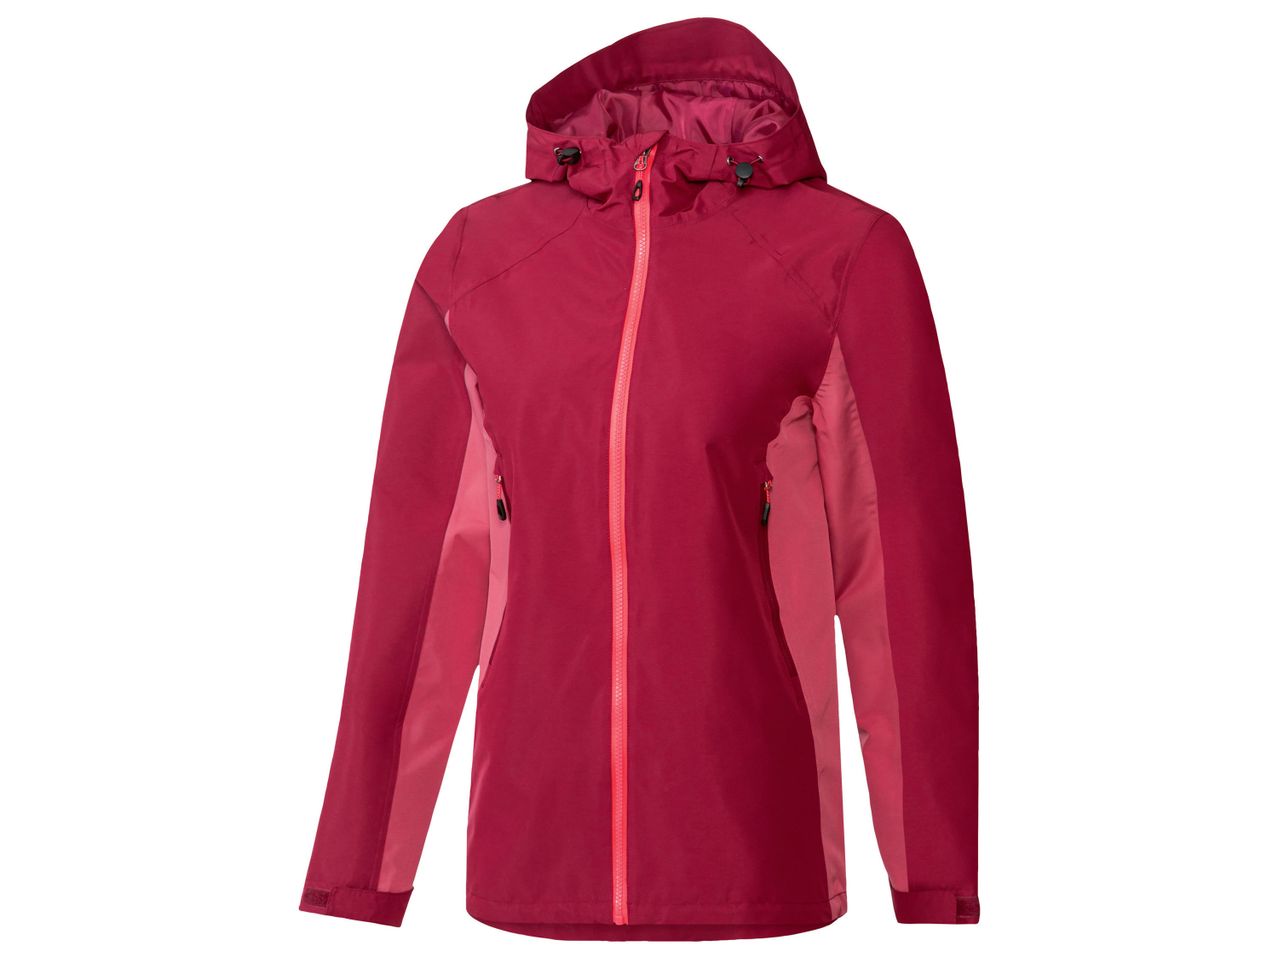 Go to full screen view: Ladies’ All Weather Jacket - Image 1